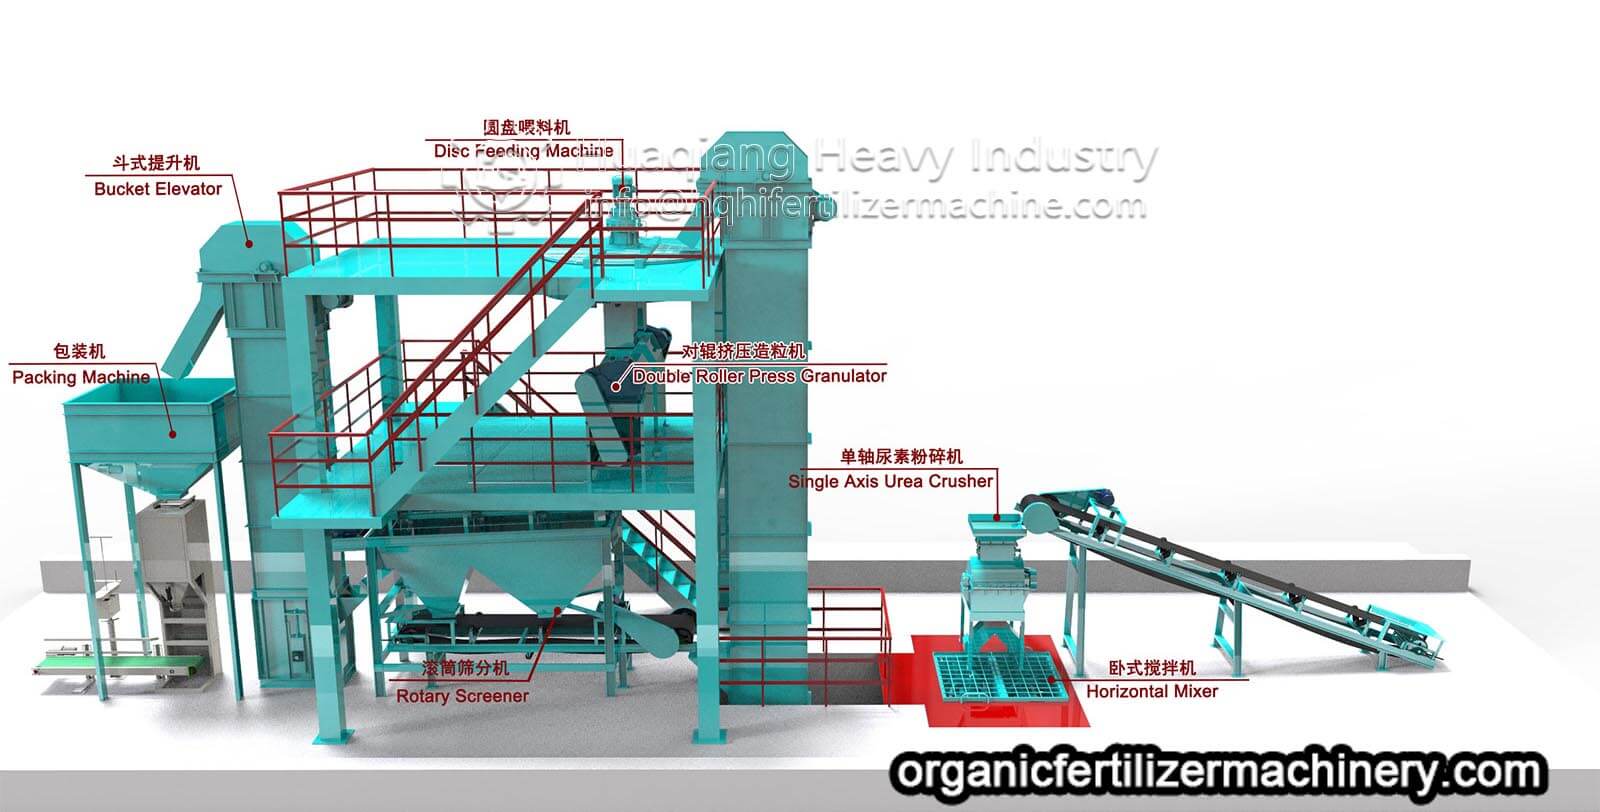 The double roller granulator is the optimum equipment for compound fertilizer production